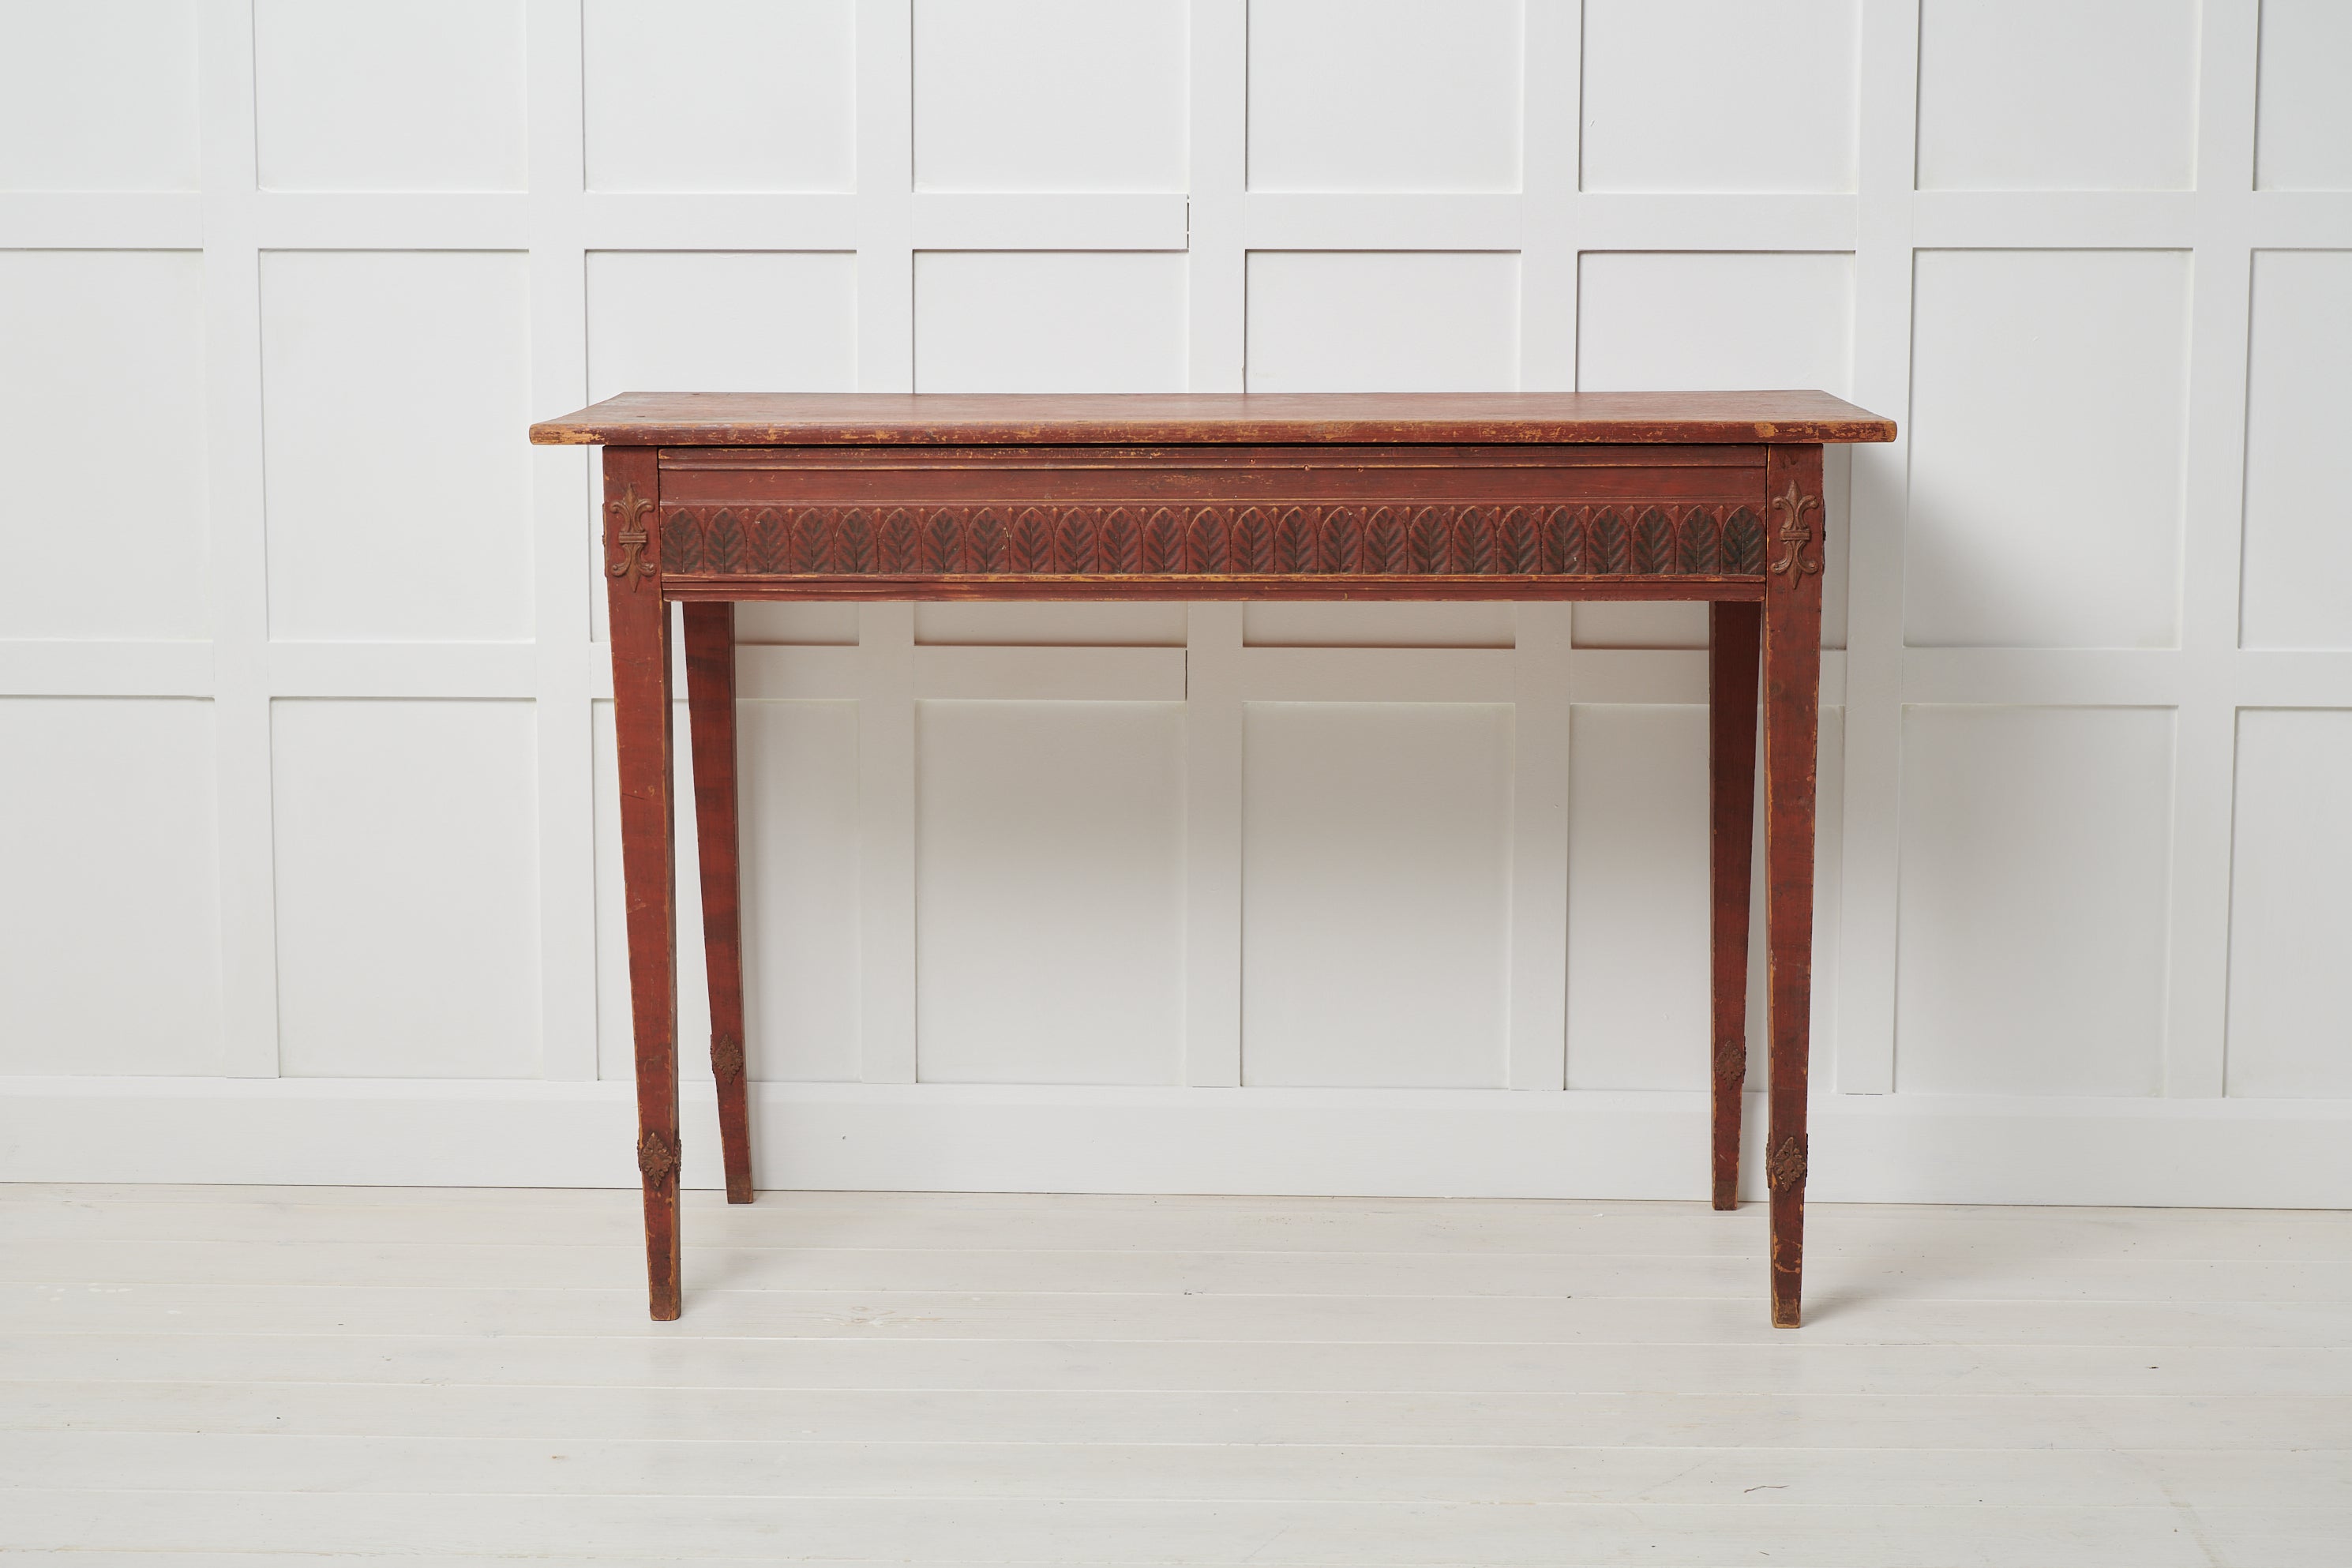 Rare antique console table in Gustavian Style from Sweden. The table is from the first years of the 19th century, around 1800 to 1810. The table is made by hand in solid pine with a handcrafted decor in the shape of leaves that wraparound the apron.